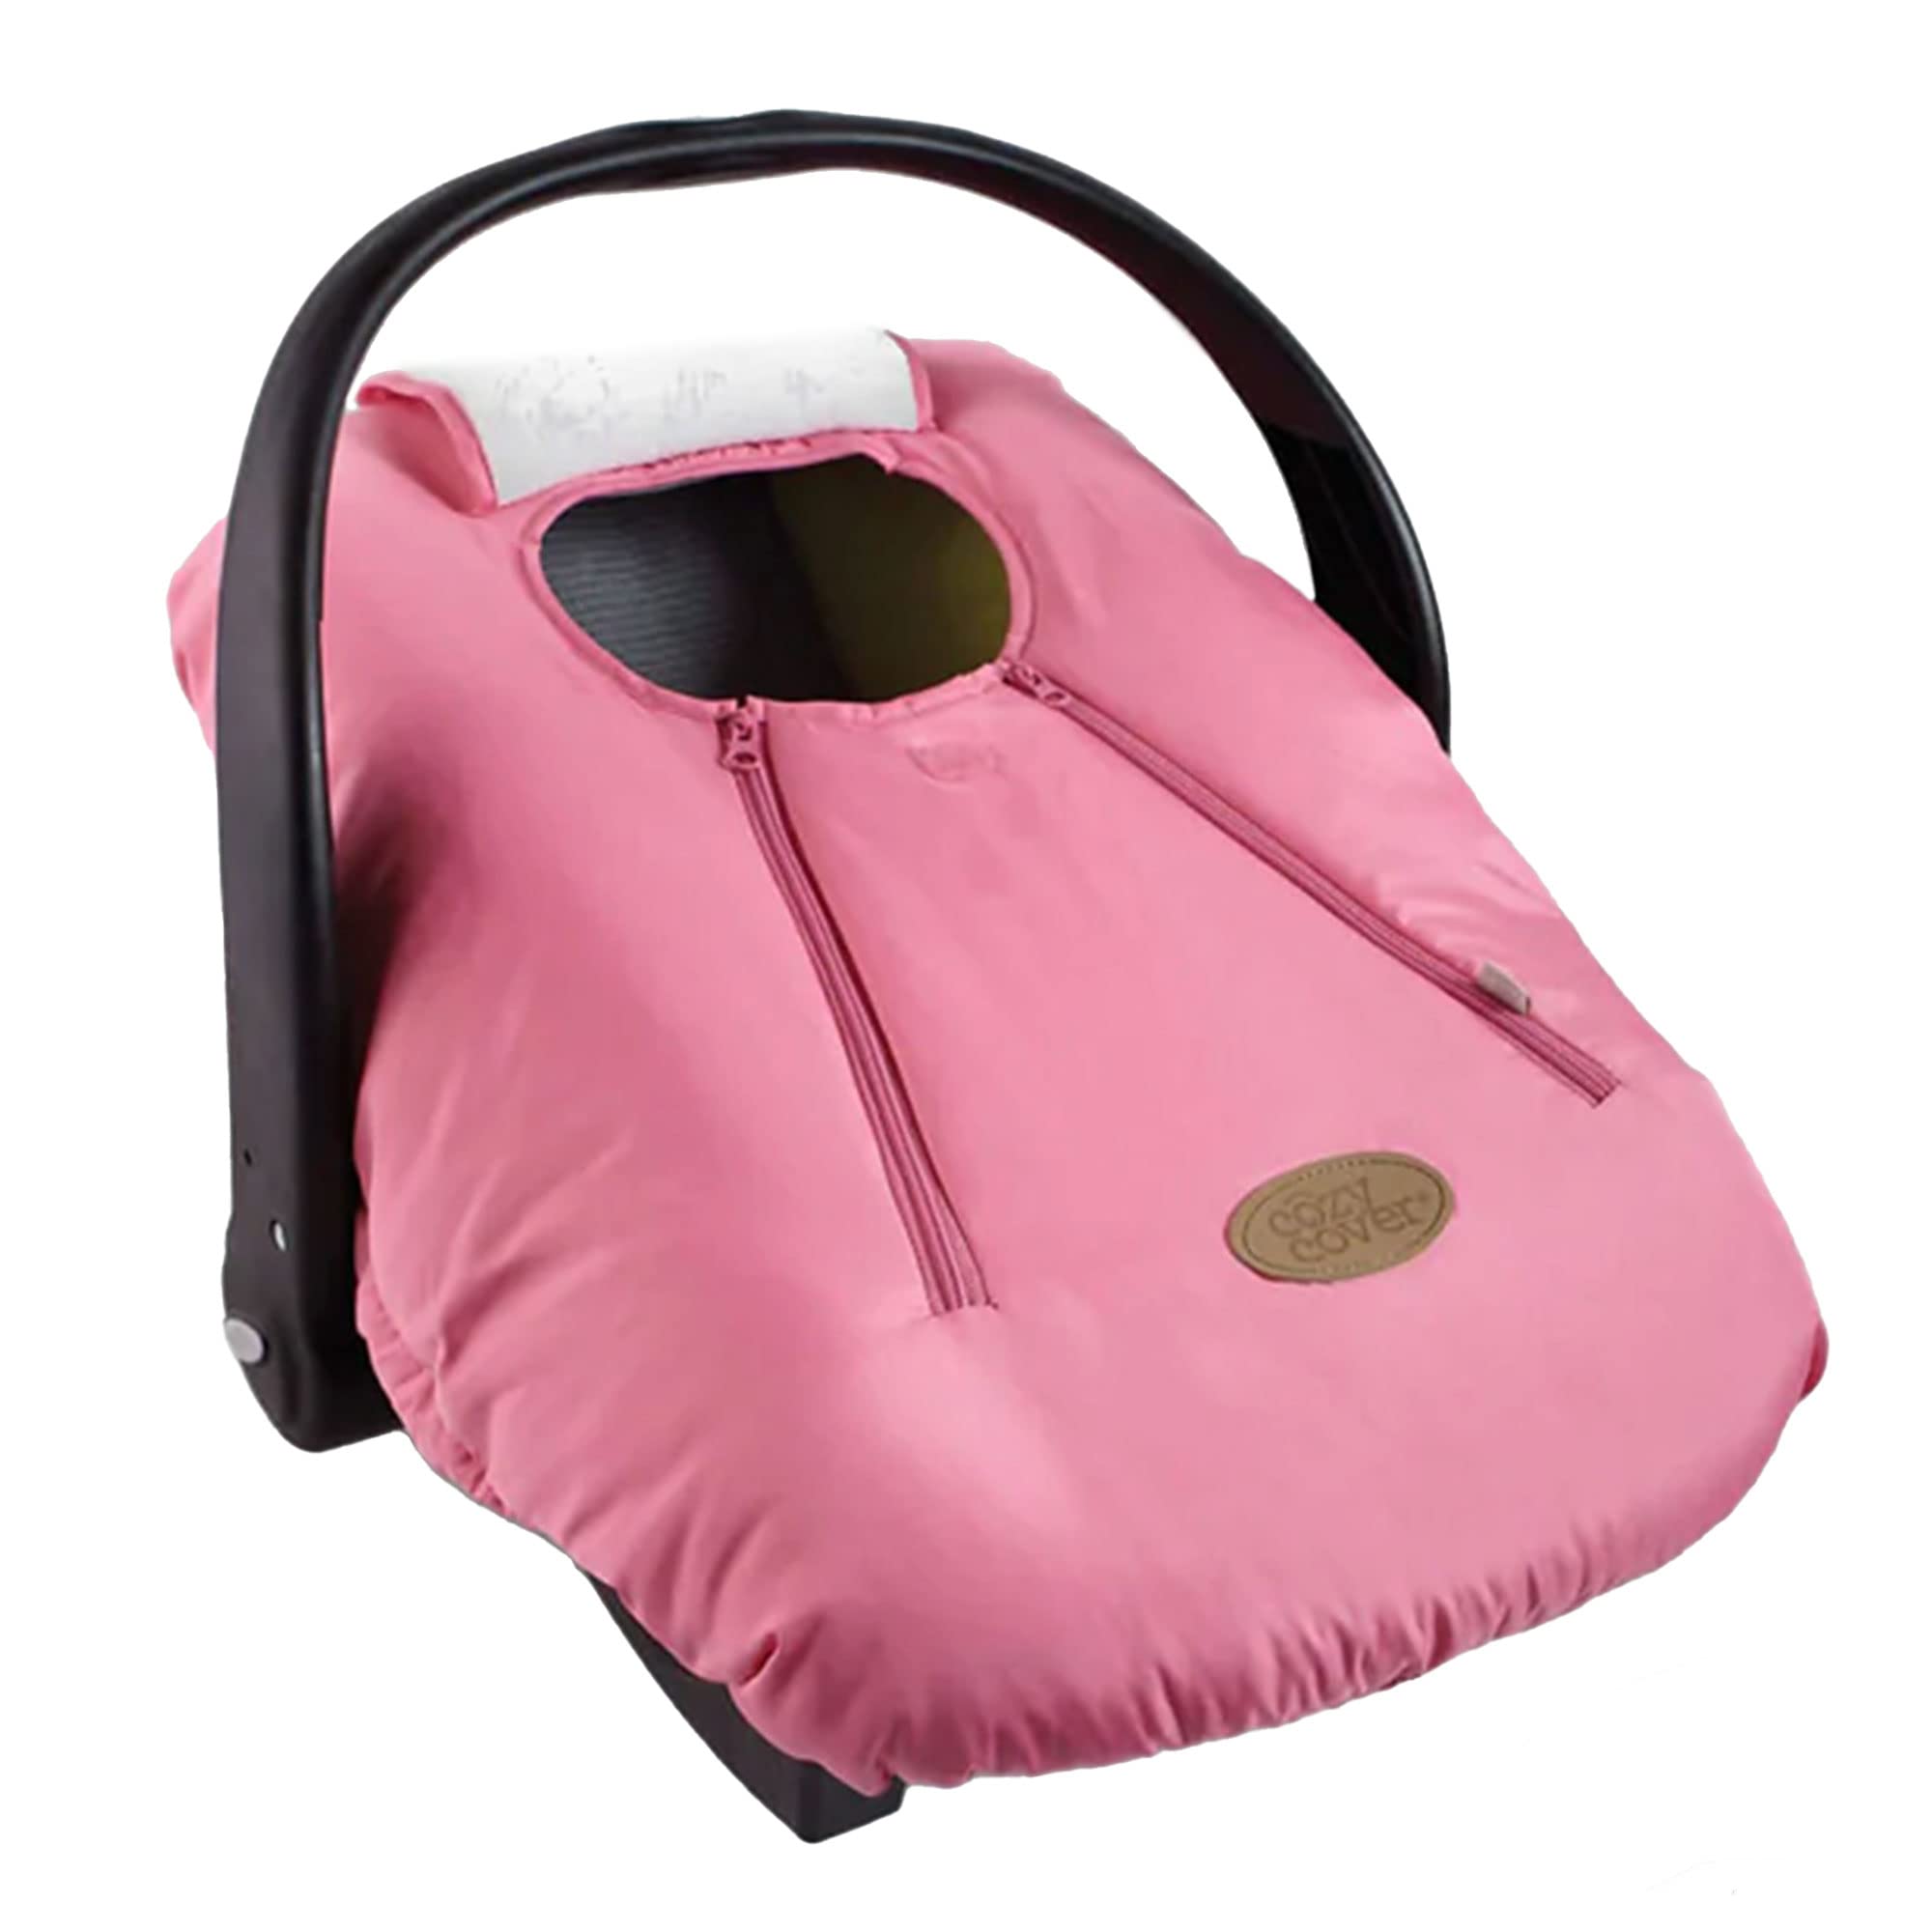 Cozy Cover Infant Car Seat Cover (Pink) - The Industry Leading Infant Carrier Cover Trusted by Over 6 Million Moms Worldwide for Keeping Your Baby Cozy & Warm